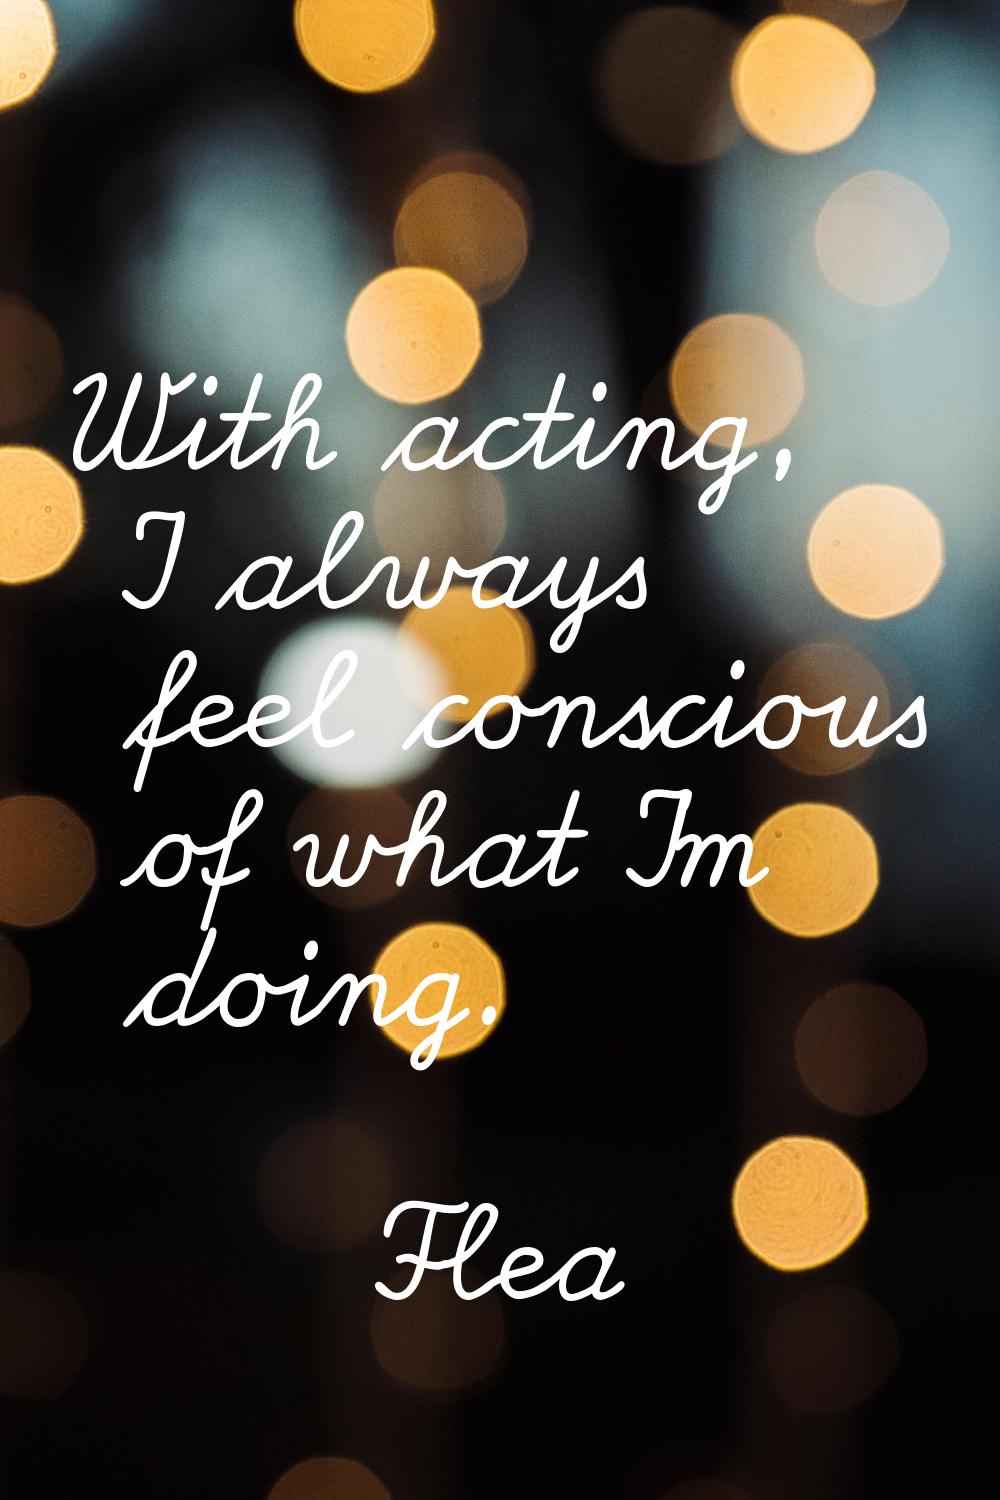 With acting, I always feel conscious of what I'm doing.